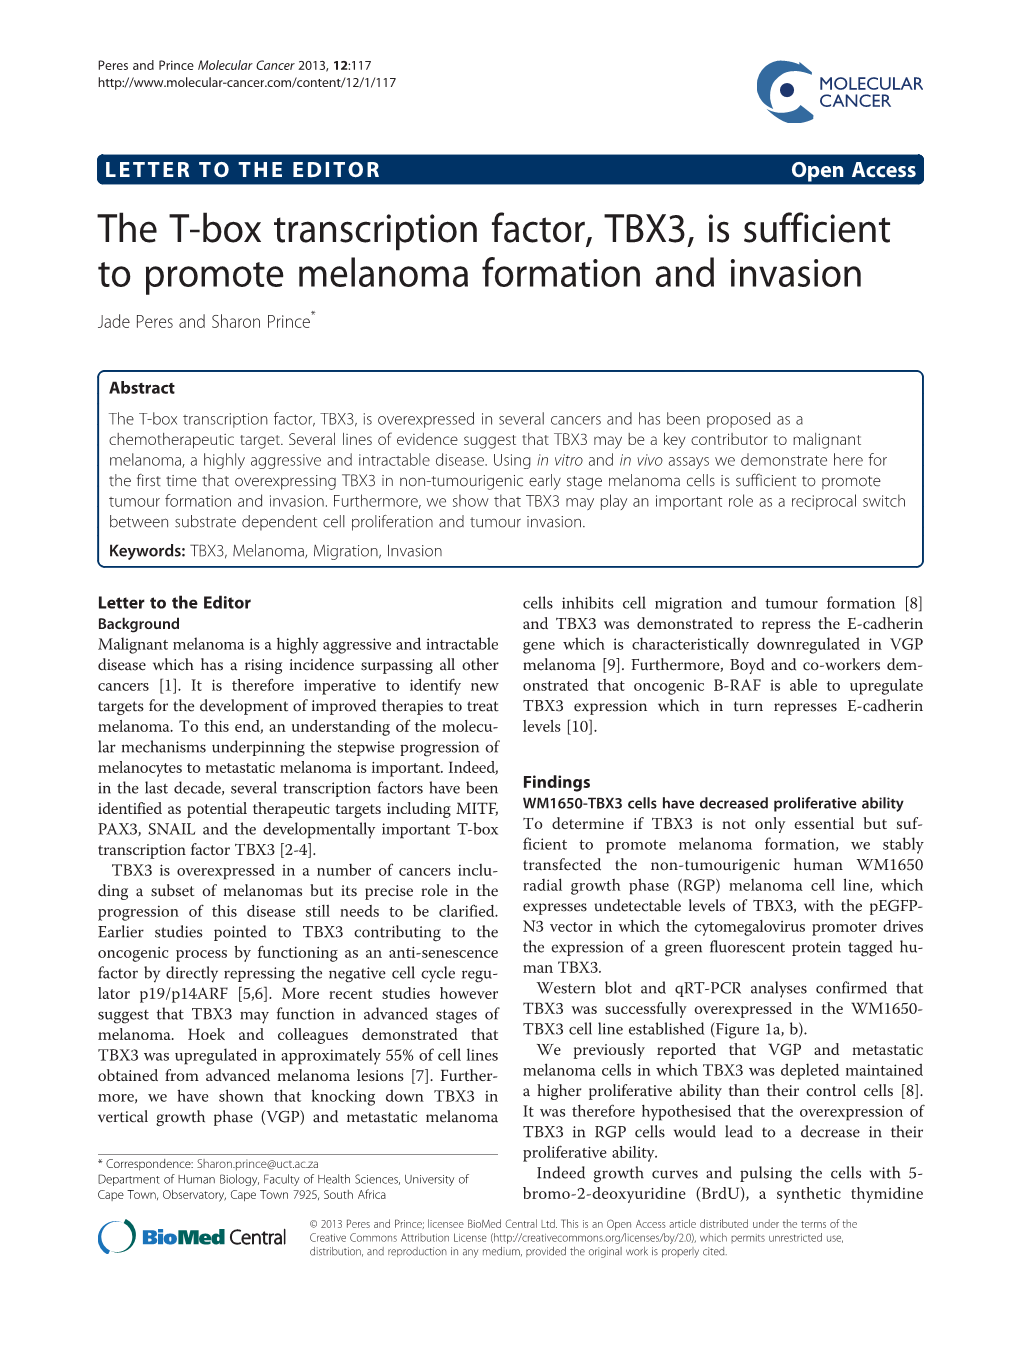 The T-Box Transcription Factor, TBX3, Is Sufficient to Promote Melanoma Formation and Invasion Jade Peres and Sharon Prince*